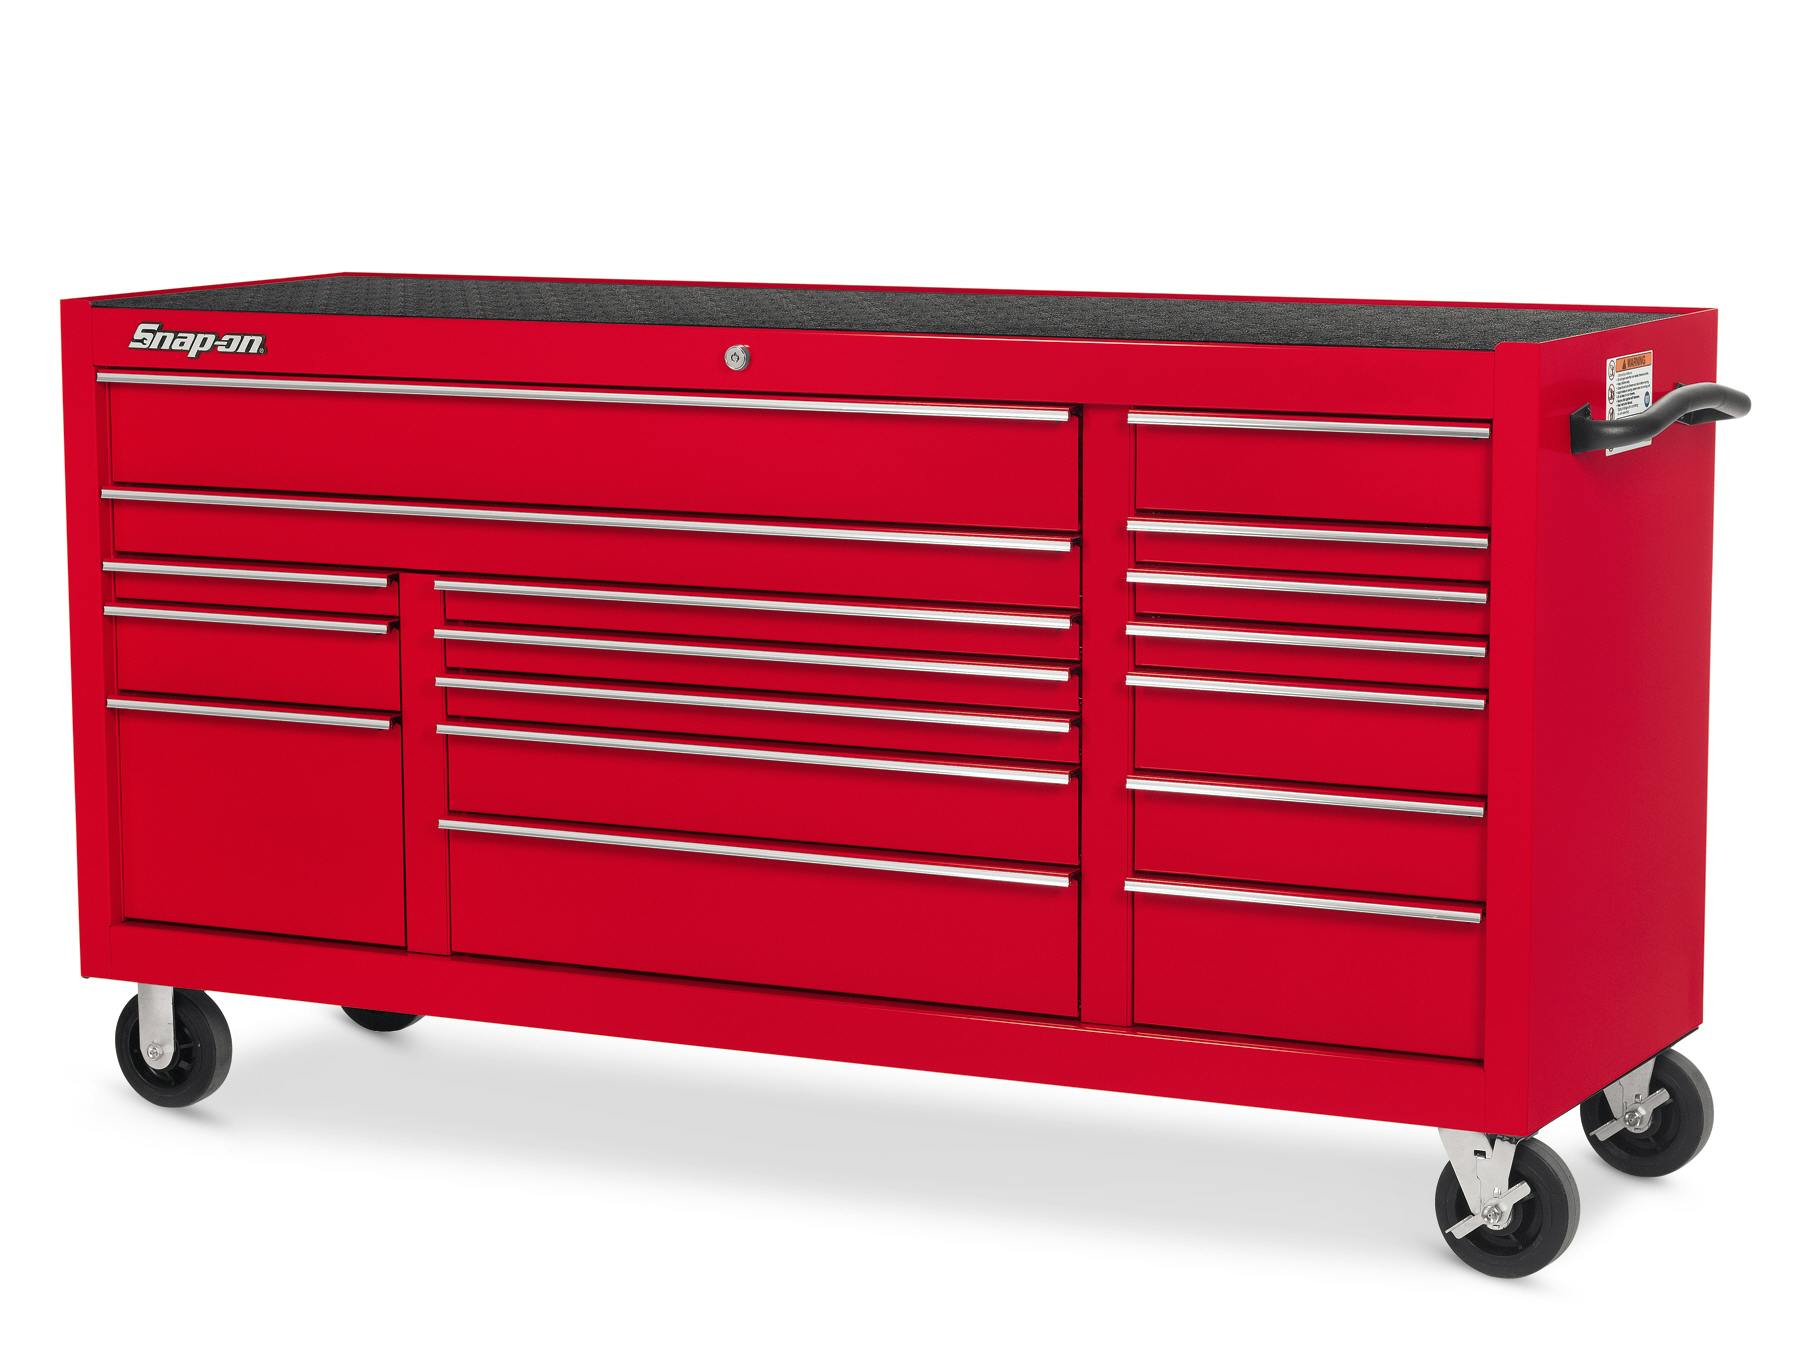 73 15-Drawer Triple-Bank Classic Series Three Extra Wide Drawer